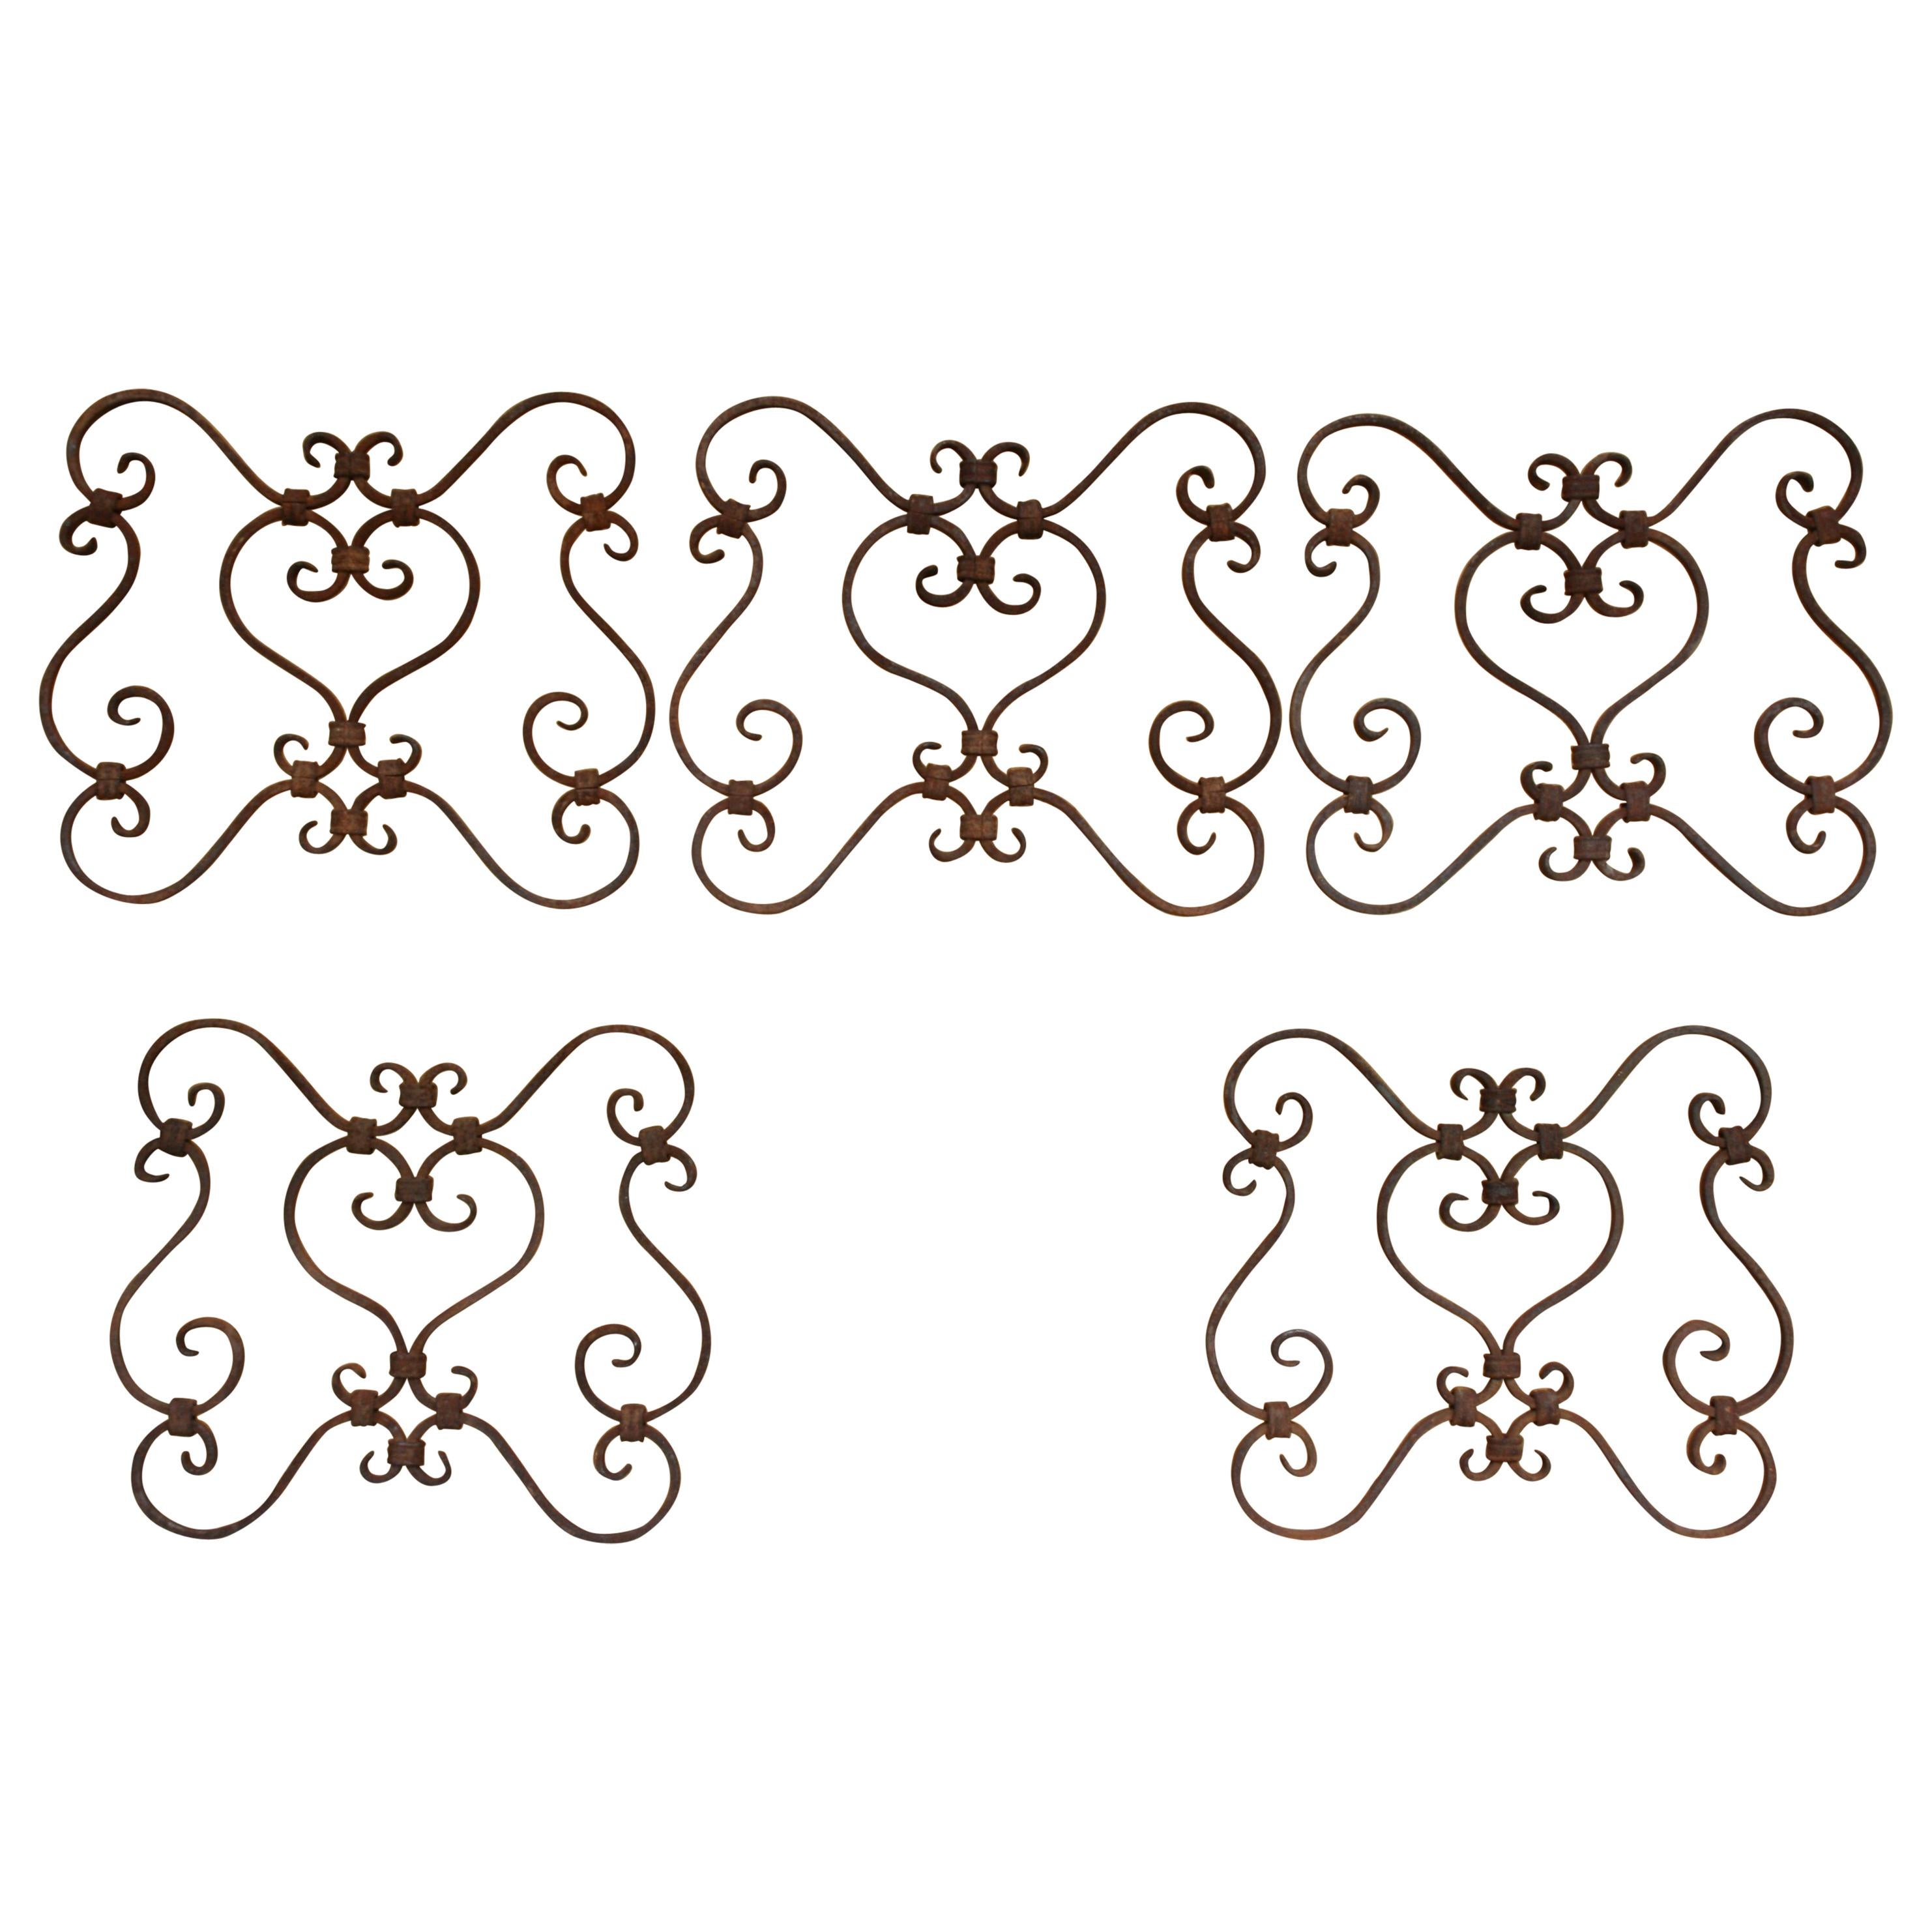 Small 19th Century Wrought Iron Window Grills or Grates, Set of 5